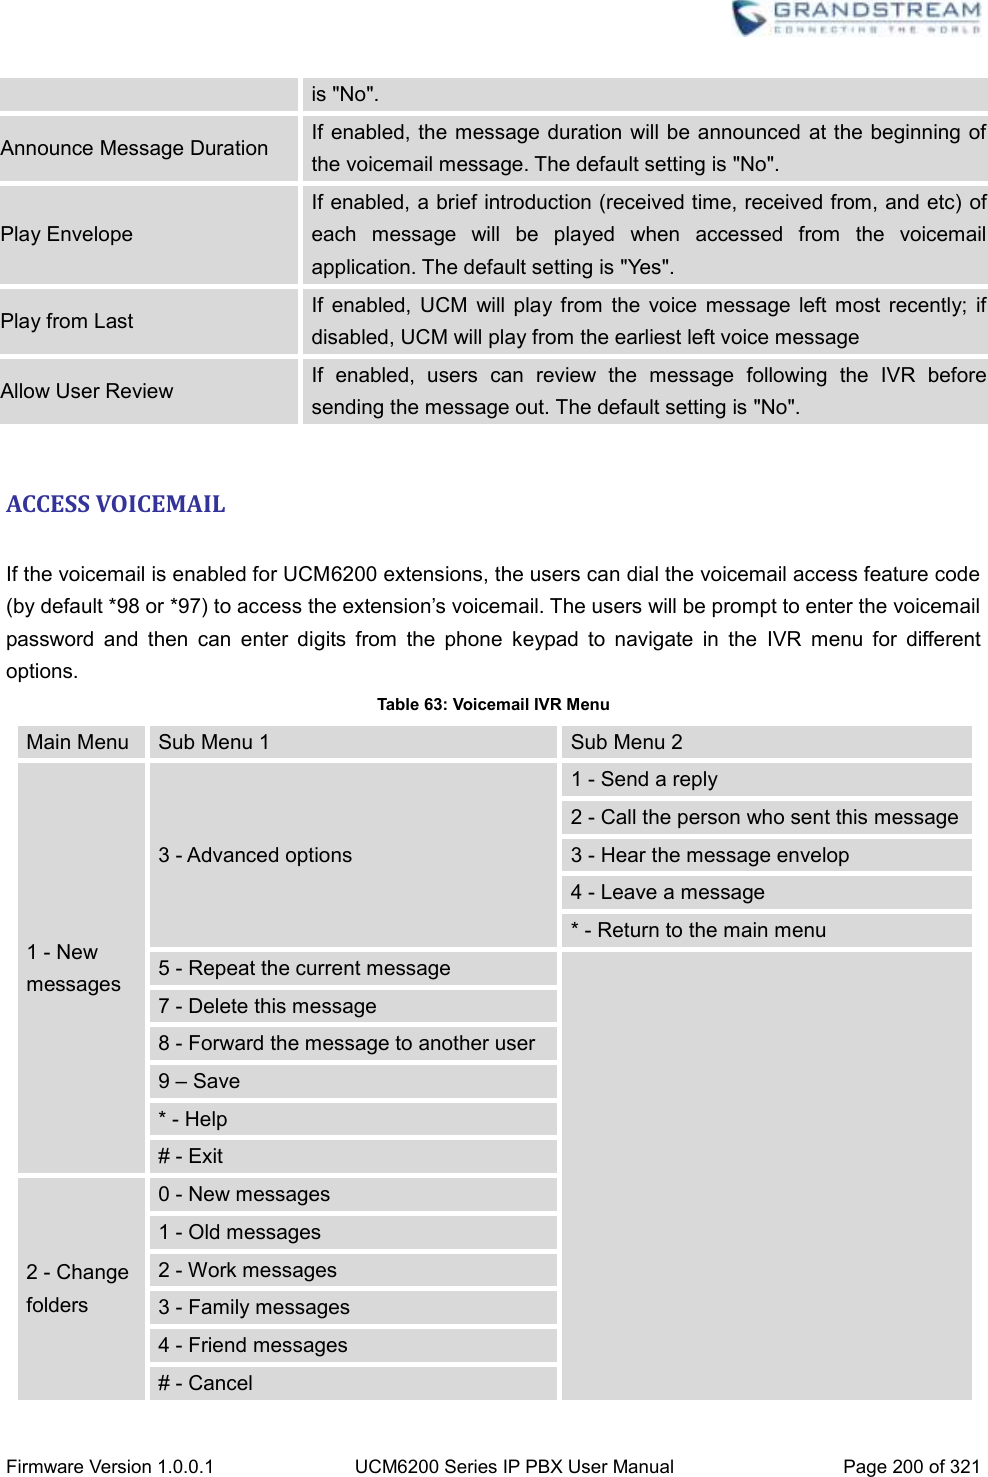  Firmware Version 1.0.0.1 UCM6200 Series IP PBX User Manual Page 200 of 321    is &quot;No&quot;. Announce Message Duration If enabled, the message duration will be announced at the beginning of the voicemail message. The default setting is &quot;No&quot;. Play Envelope If enabled, a brief introduction (received time, received from, and etc) of each  message  will  be  played  when  accessed  from  the  voicemail application. The default setting is &quot;Yes&quot;. Play from Last If  enabled,  UCM  will  play from  the  voice  message  left most  recently;  if disabled, UCM will play from the earliest left voice message Allow User Review If  enabled,  users  can  review  the  message  following  the  IVR  before sending the message out. The default setting is &quot;No&quot;.  ACCESS VOICEMAIL  If the voicemail is enabled for UCM6200 extensions, the users can dial the voicemail access feature code (by default *98 or *97) to access the extension’s voicemail. The users will be prompt to enter the voicemail password  and  then  can  enter  digits  from  the  phone  keypad  to  navigate  in  the  IVR  menu  for  different options. Table 63: Voicemail IVR Menu Main Menu Sub Menu 1 Sub Menu 2 1 - New messages 3 - Advanced options 1 - Send a reply 2 - Call the person who sent this message 3 - Hear the message envelop 4 - Leave a message * - Return to the main menu 5 - Repeat the current message  7 - Delete this message 8 - Forward the message to another user 9 – Save * - Help # - Exit 2 - Change folders 0 - New messages 1 - Old messages 2 - Work messages 3 - Family messages 4 - Friend messages # - Cancel 